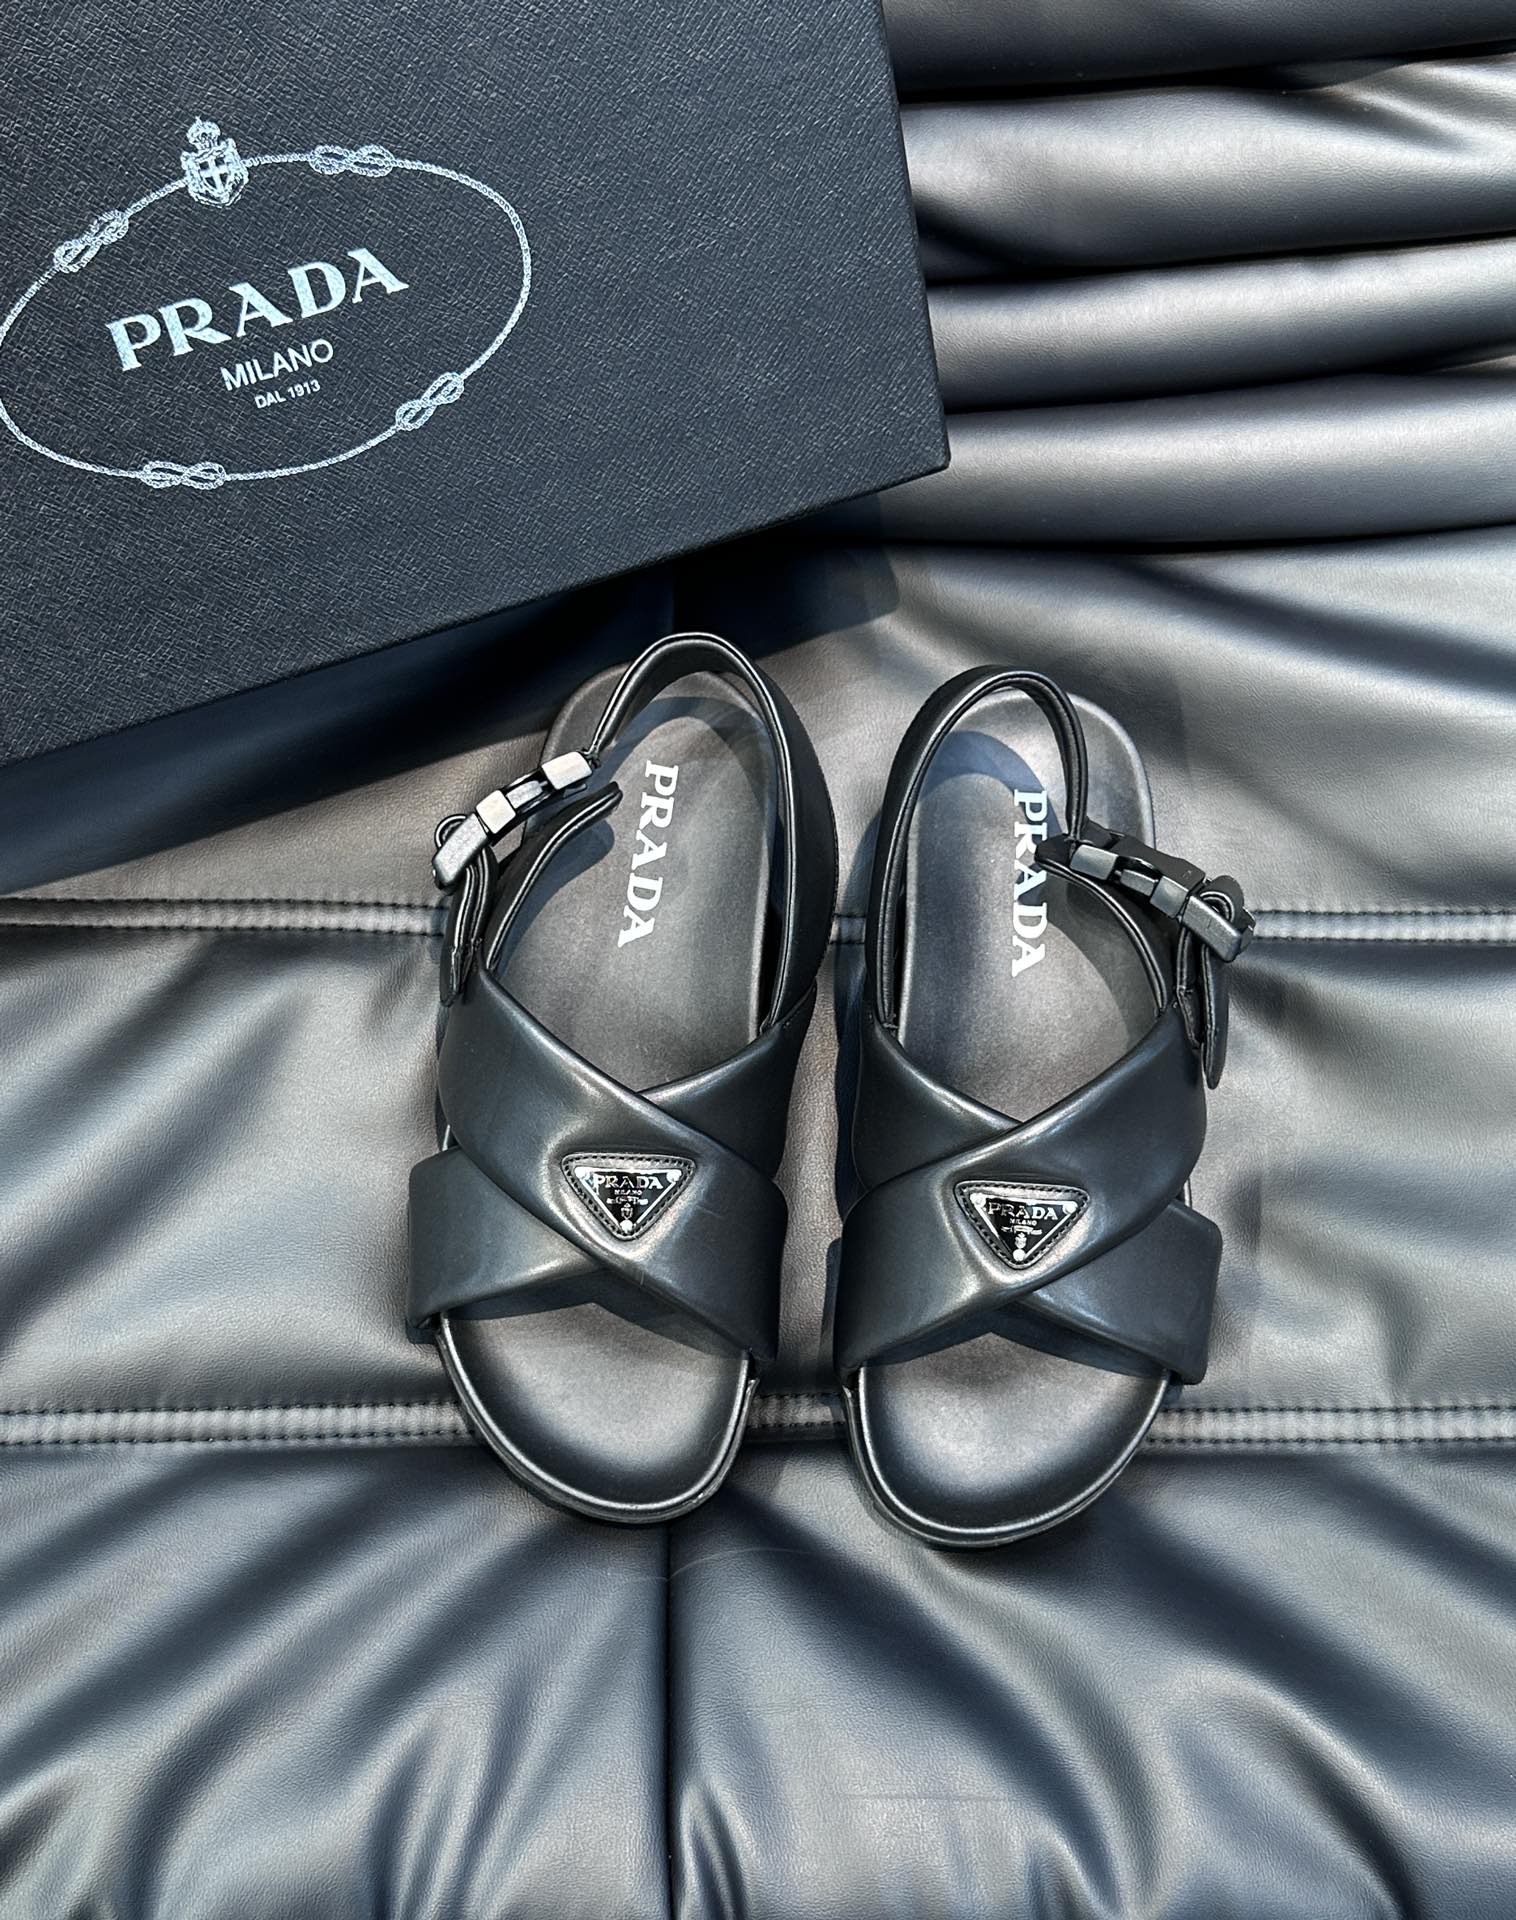 Prada Shoes Sandals Slippers Men Rubber Sheepskin Summer Collection Casual